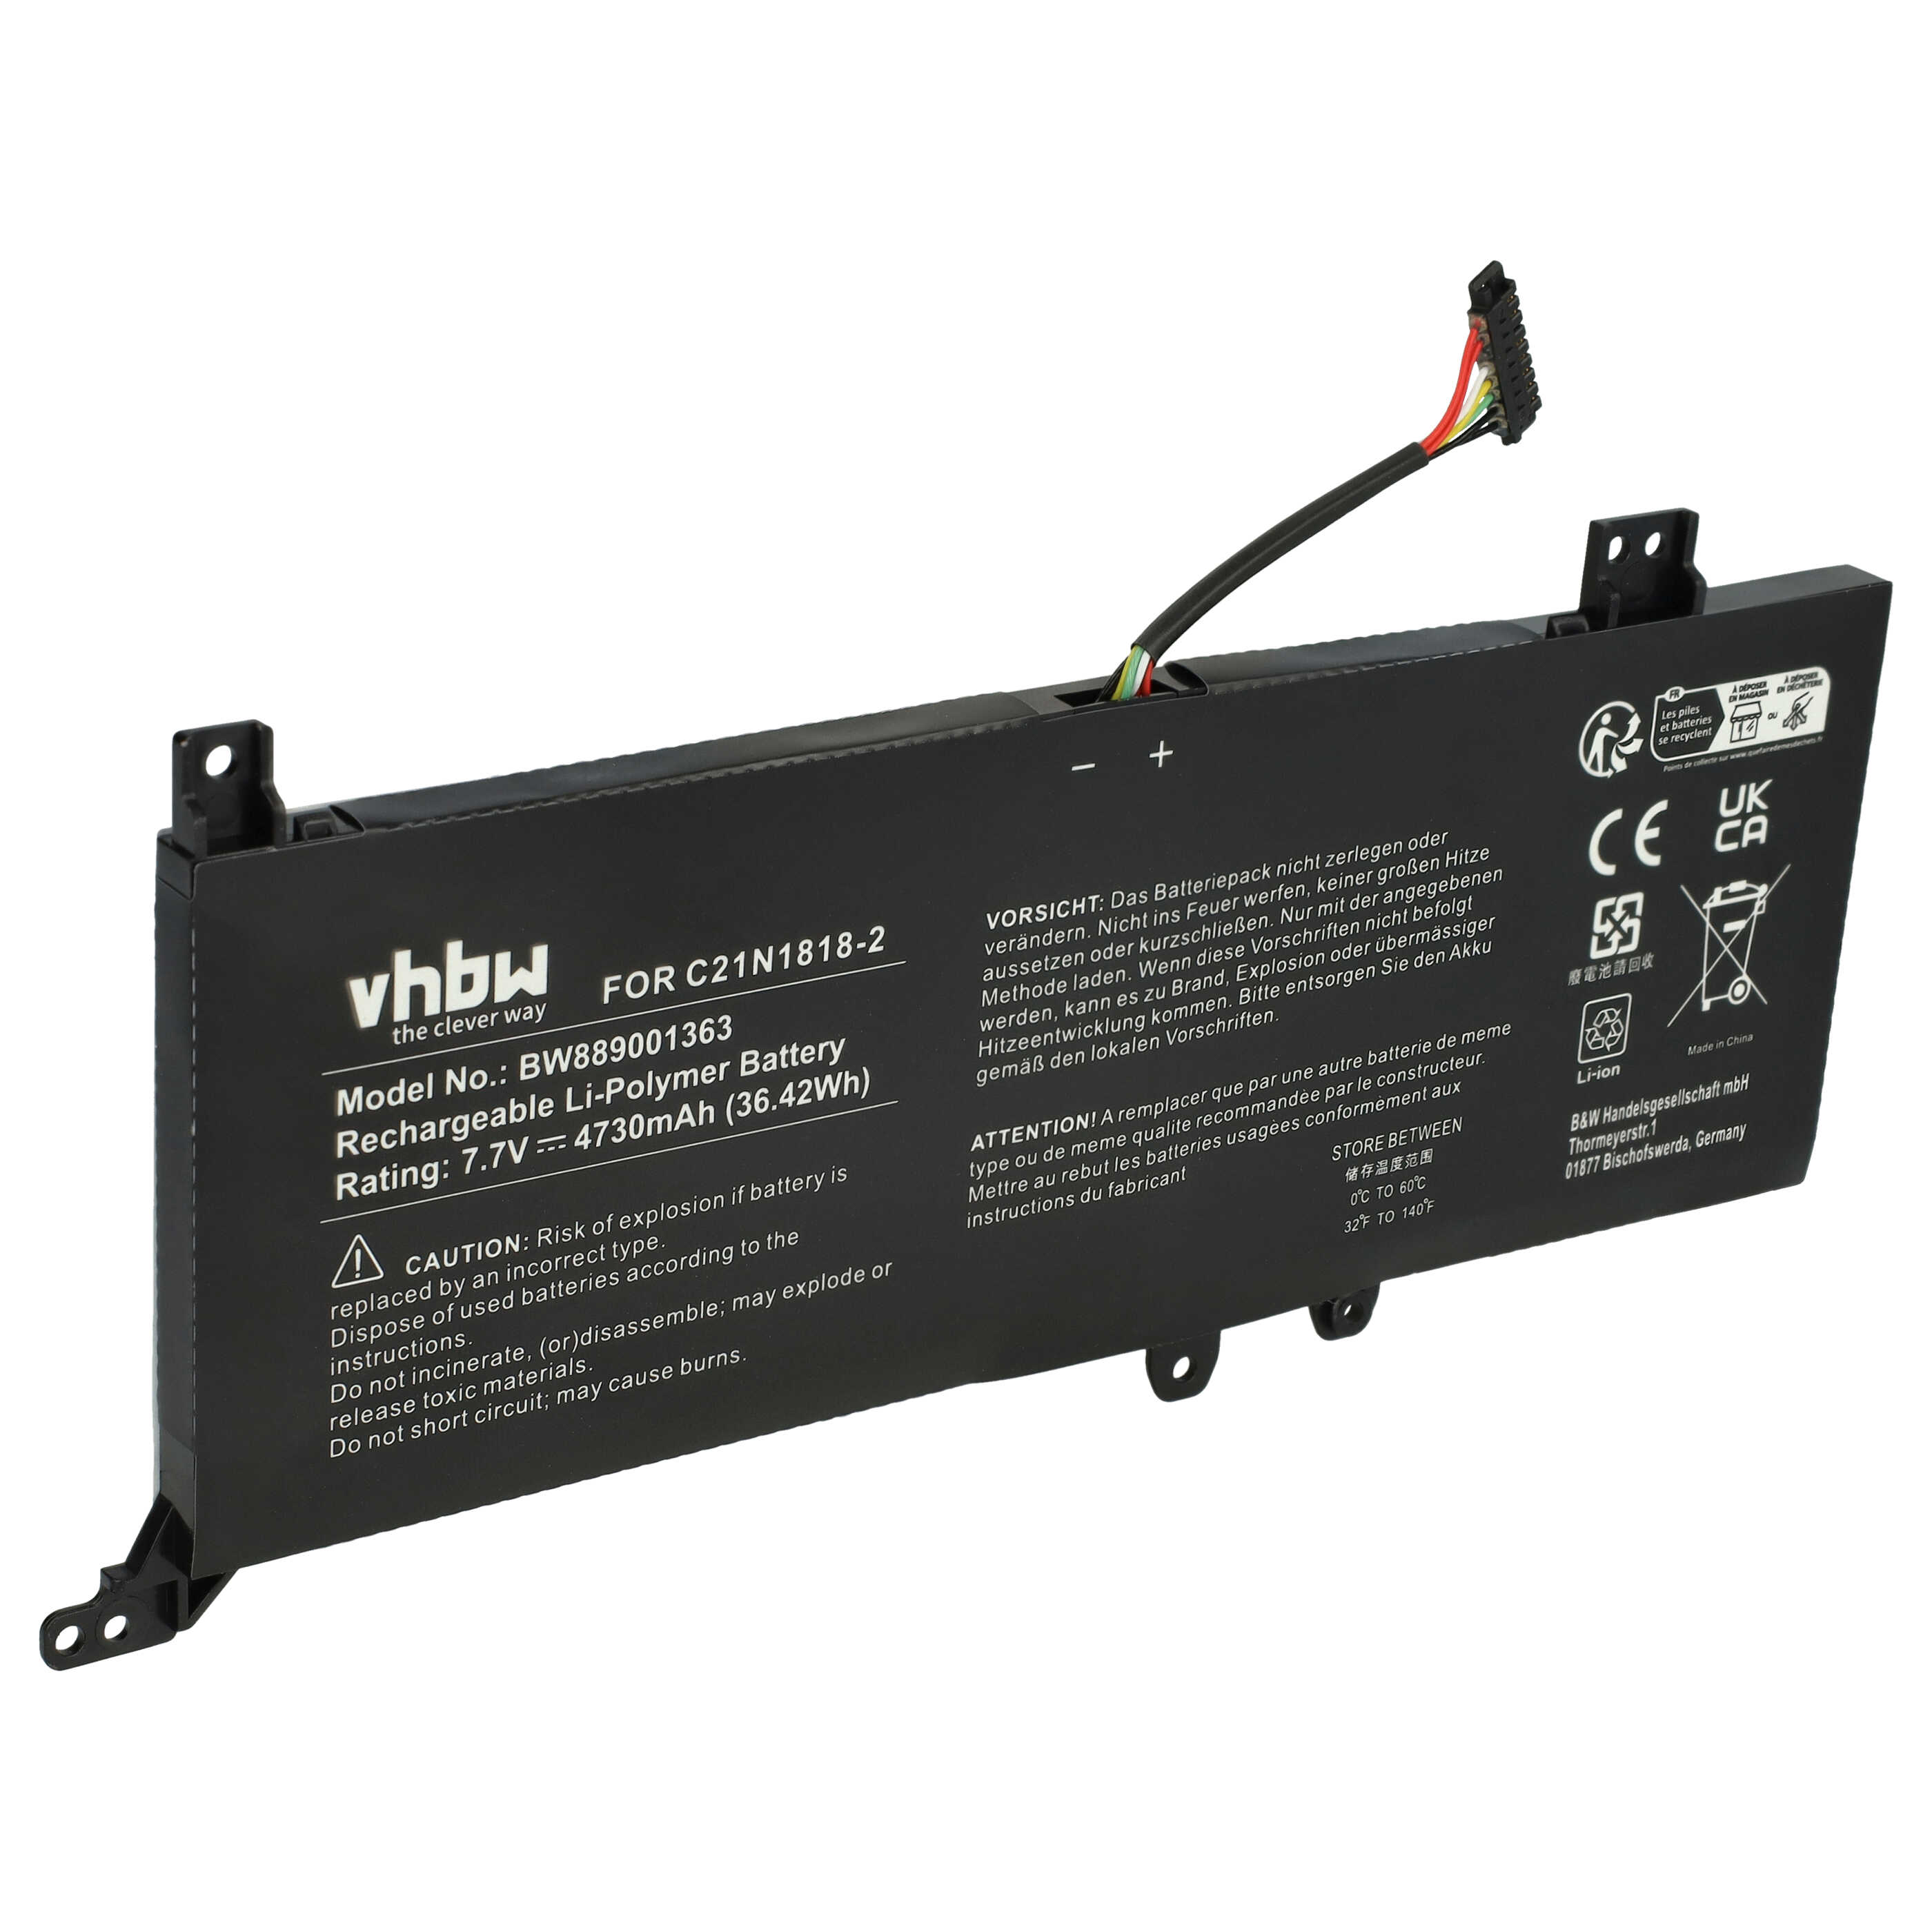 Notebook Battery Replacement for Asus 0B200-03280500, C21N1818-2 - 4730mAh 7.7V Li-polymer